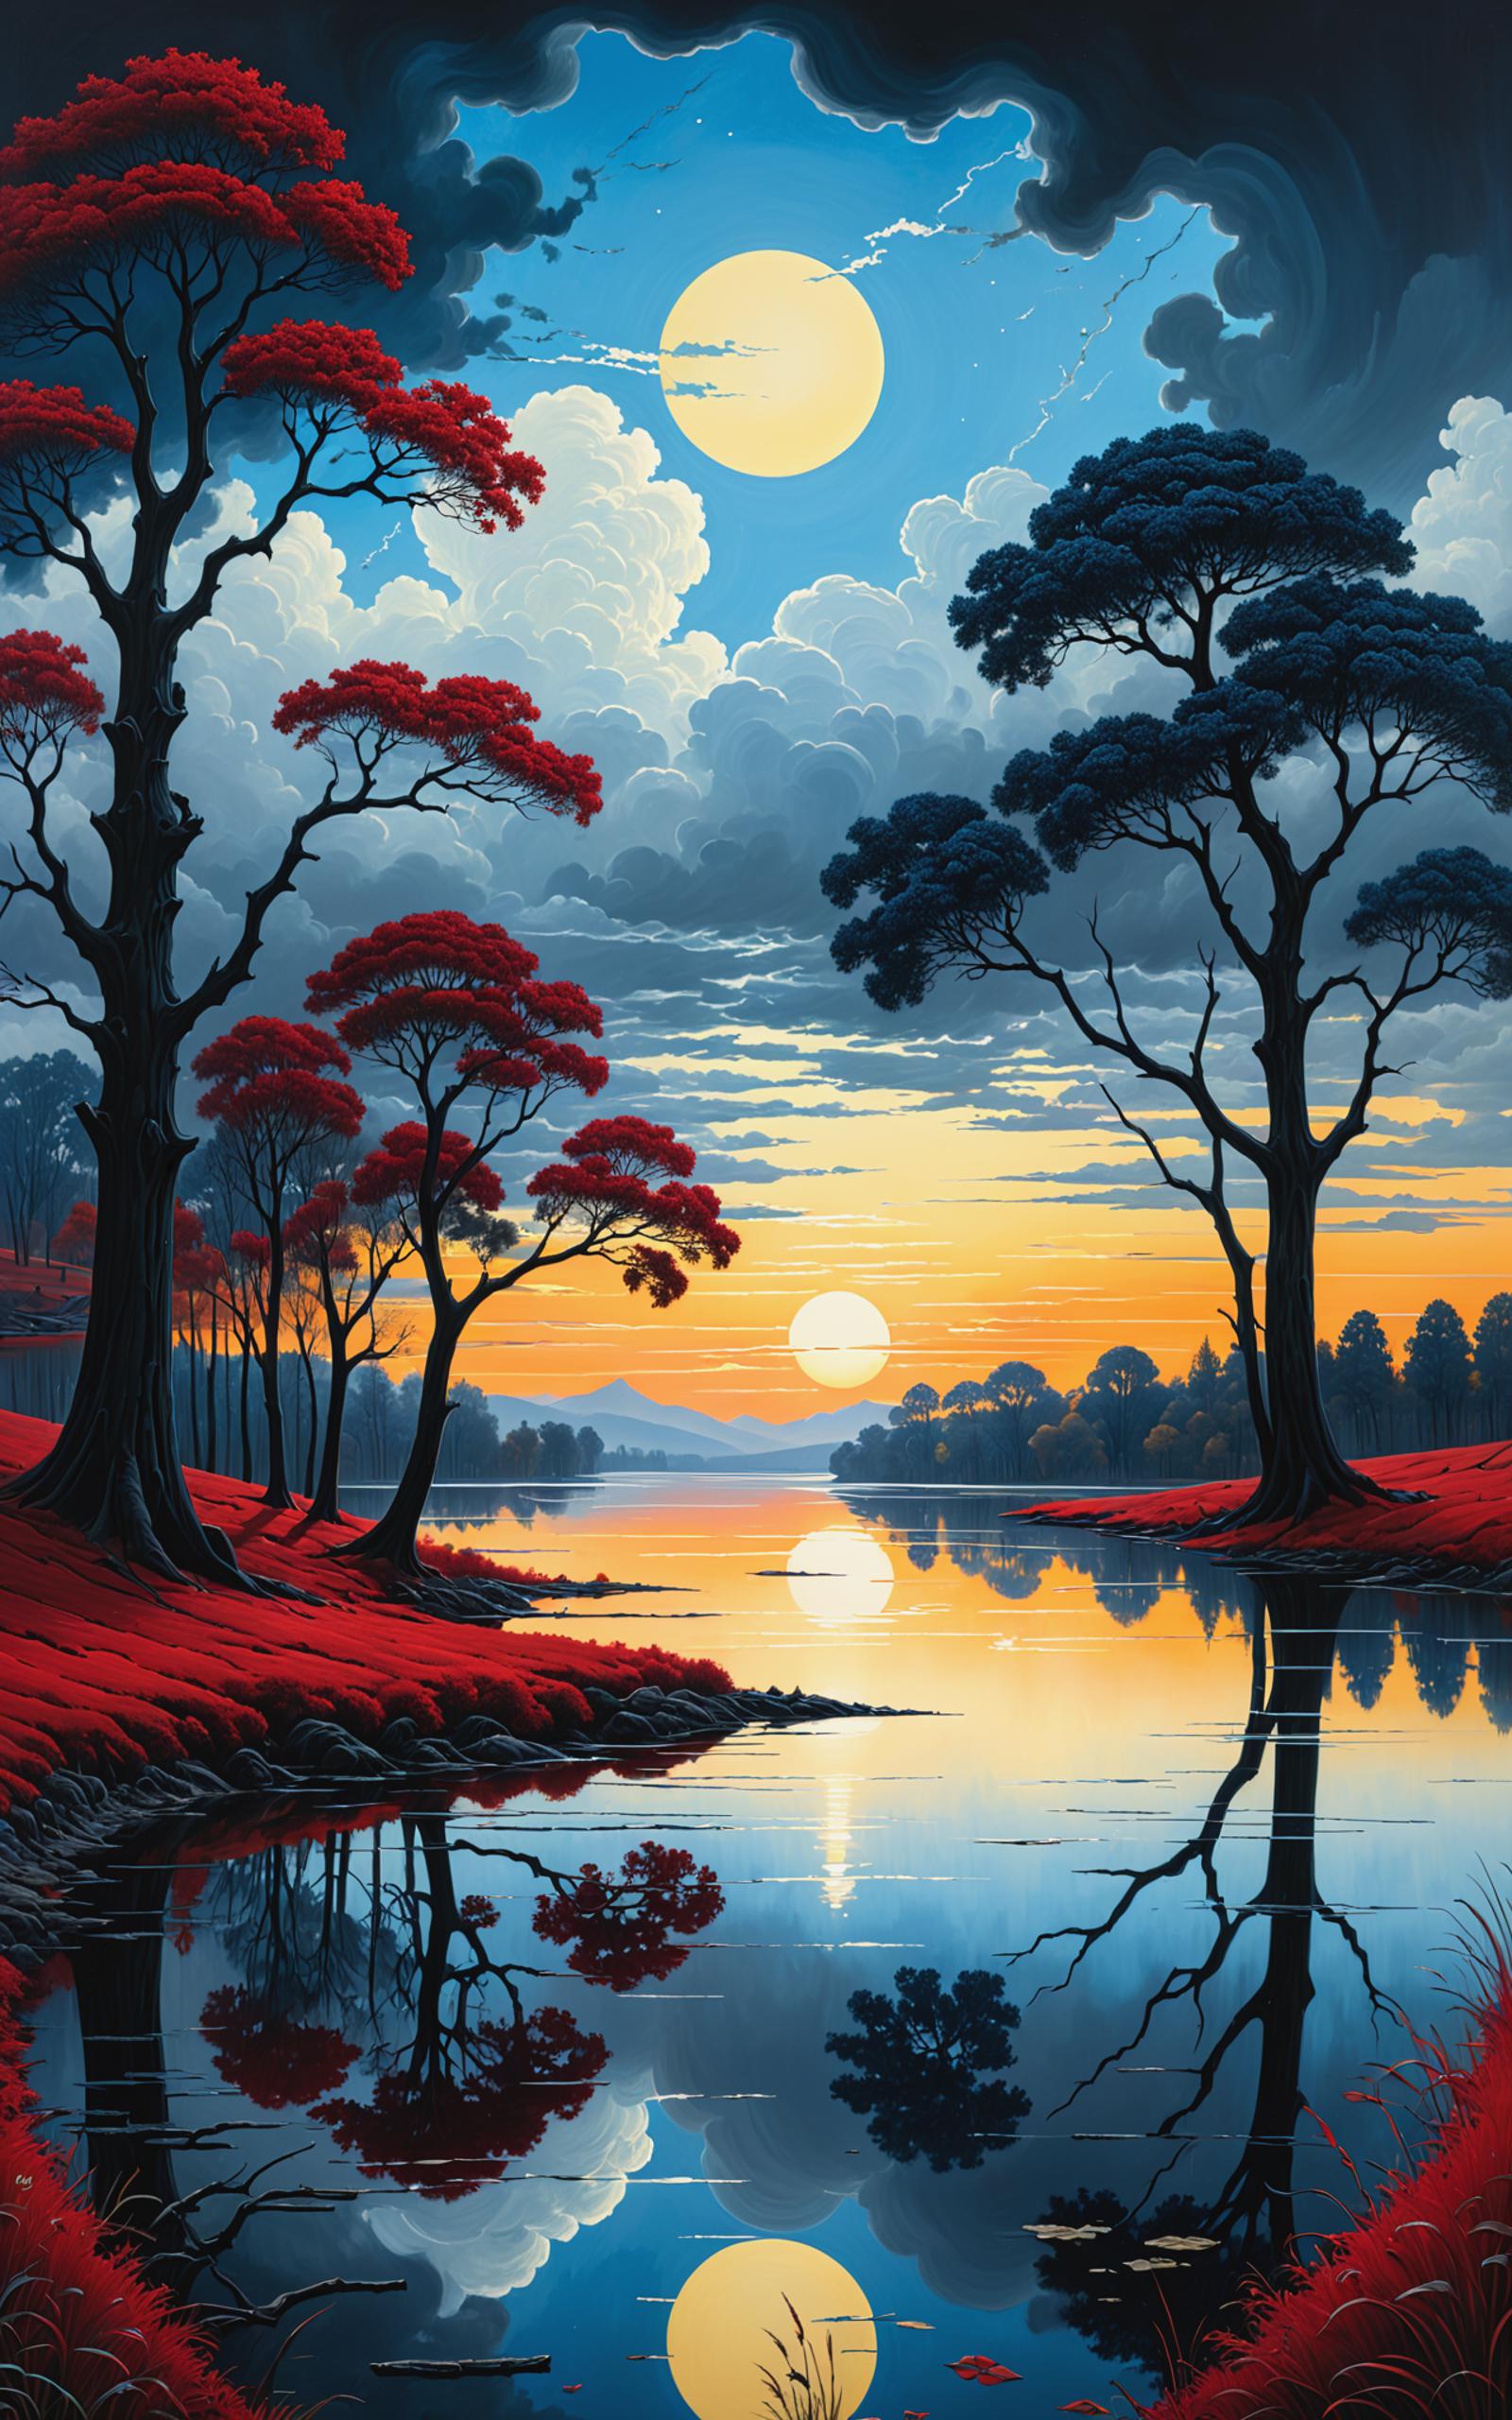 A Painting of a Sunset Over a Lake with Trees and Clouds